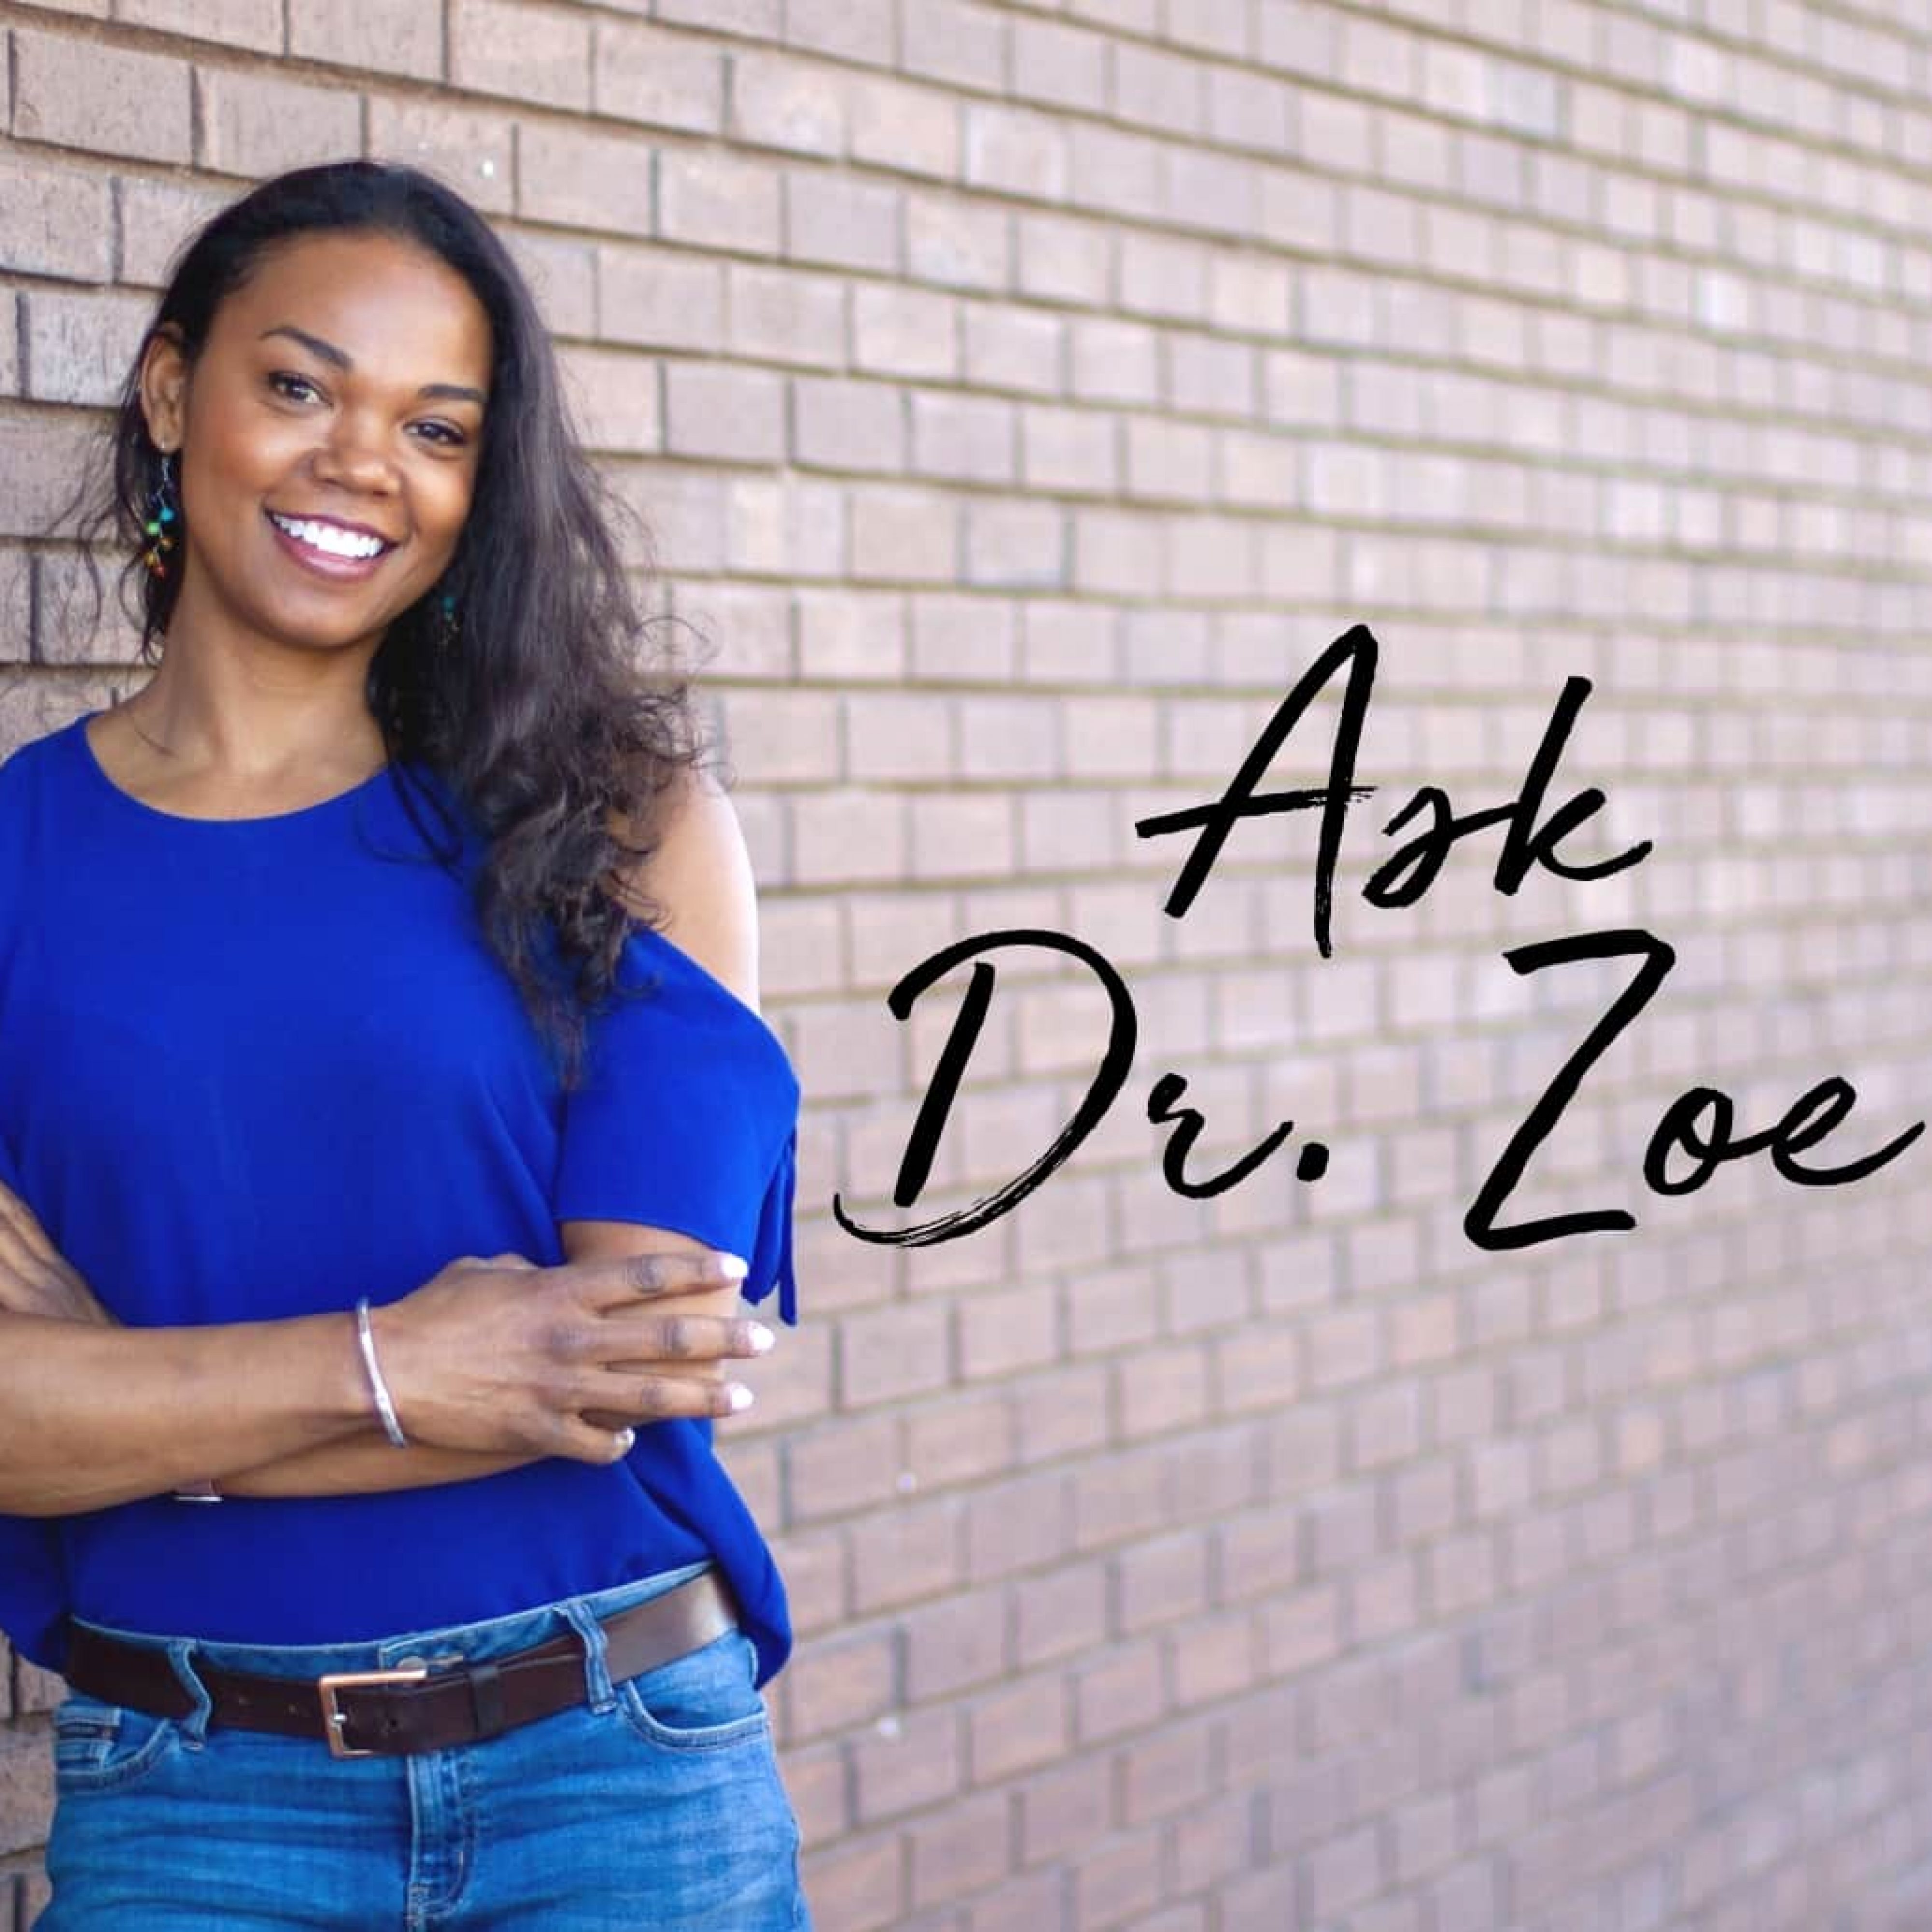 Ask Dr. Zoe - How Can I Parent with More Authority?